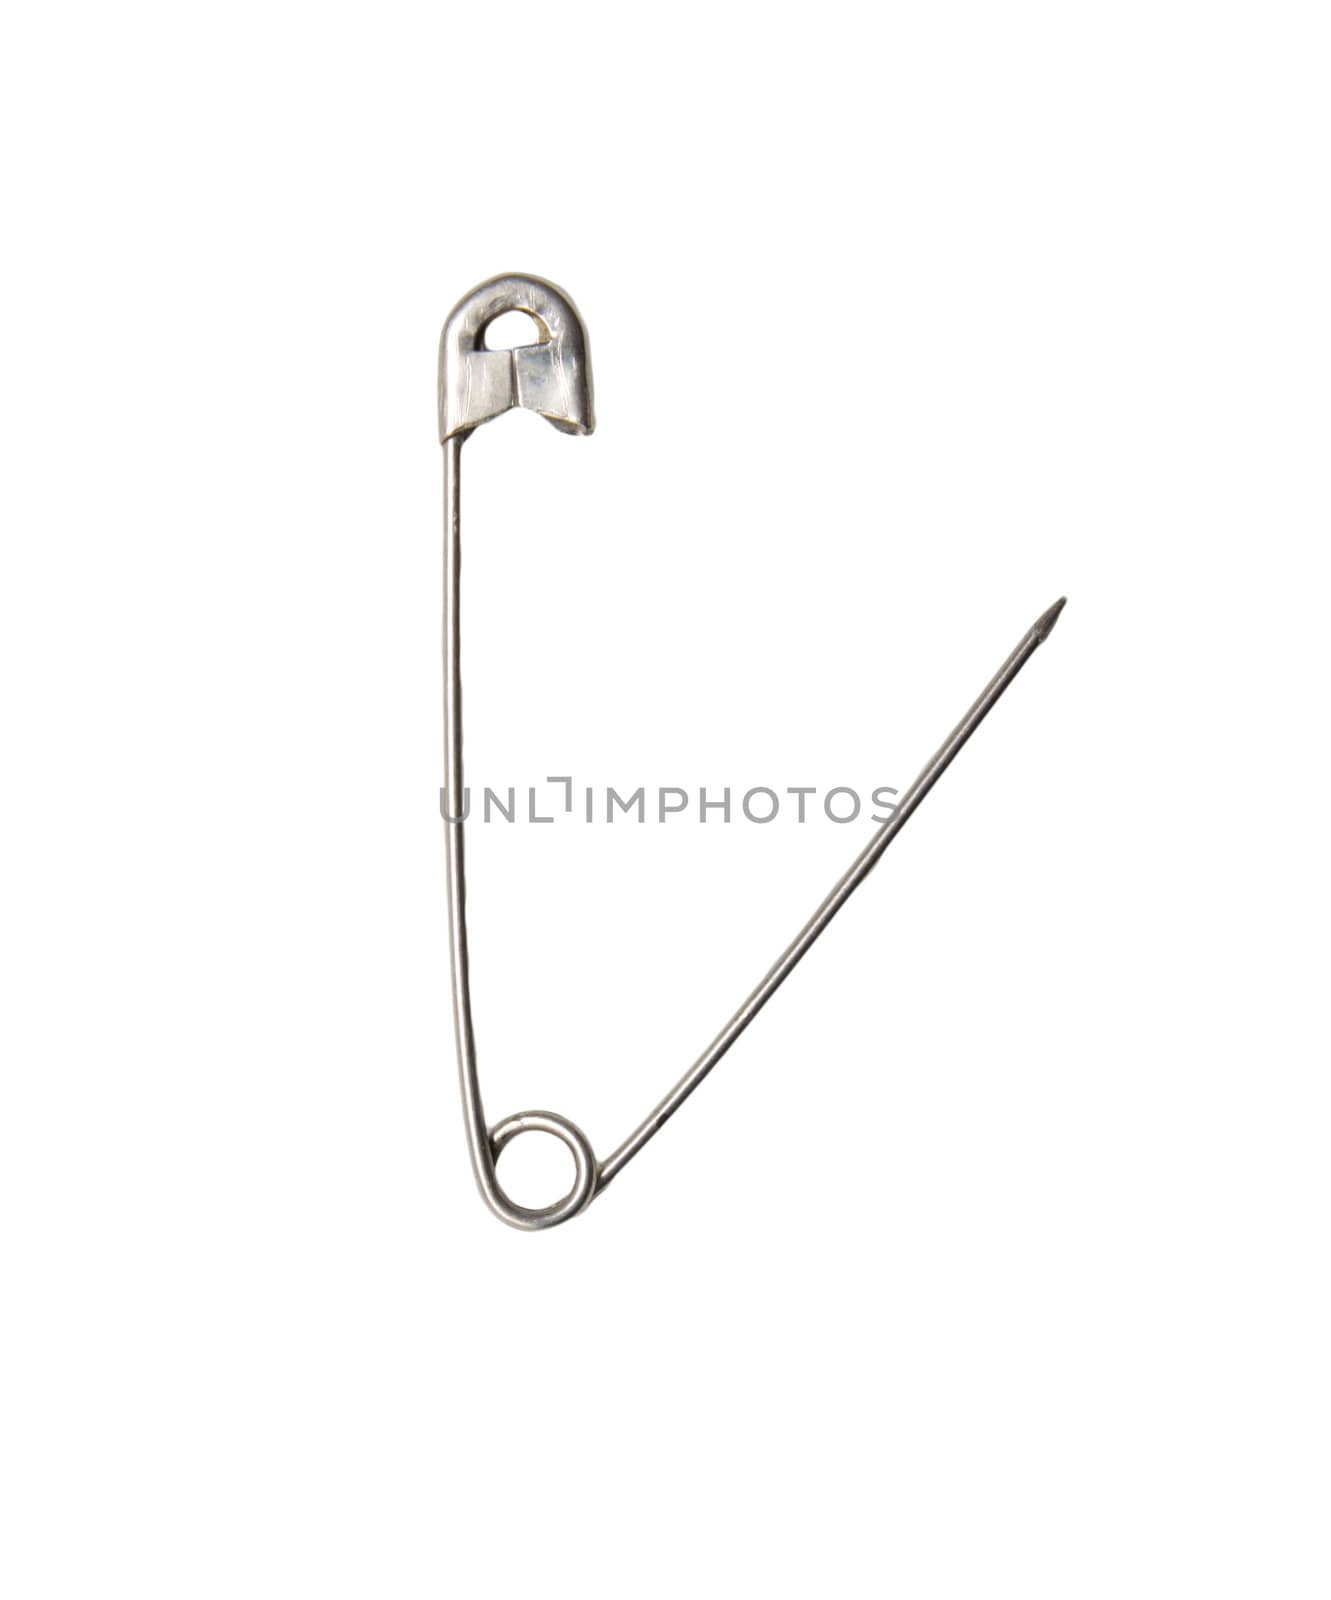 Closed safety pin. Cut out, on white background. Macro. On edge  by schankz